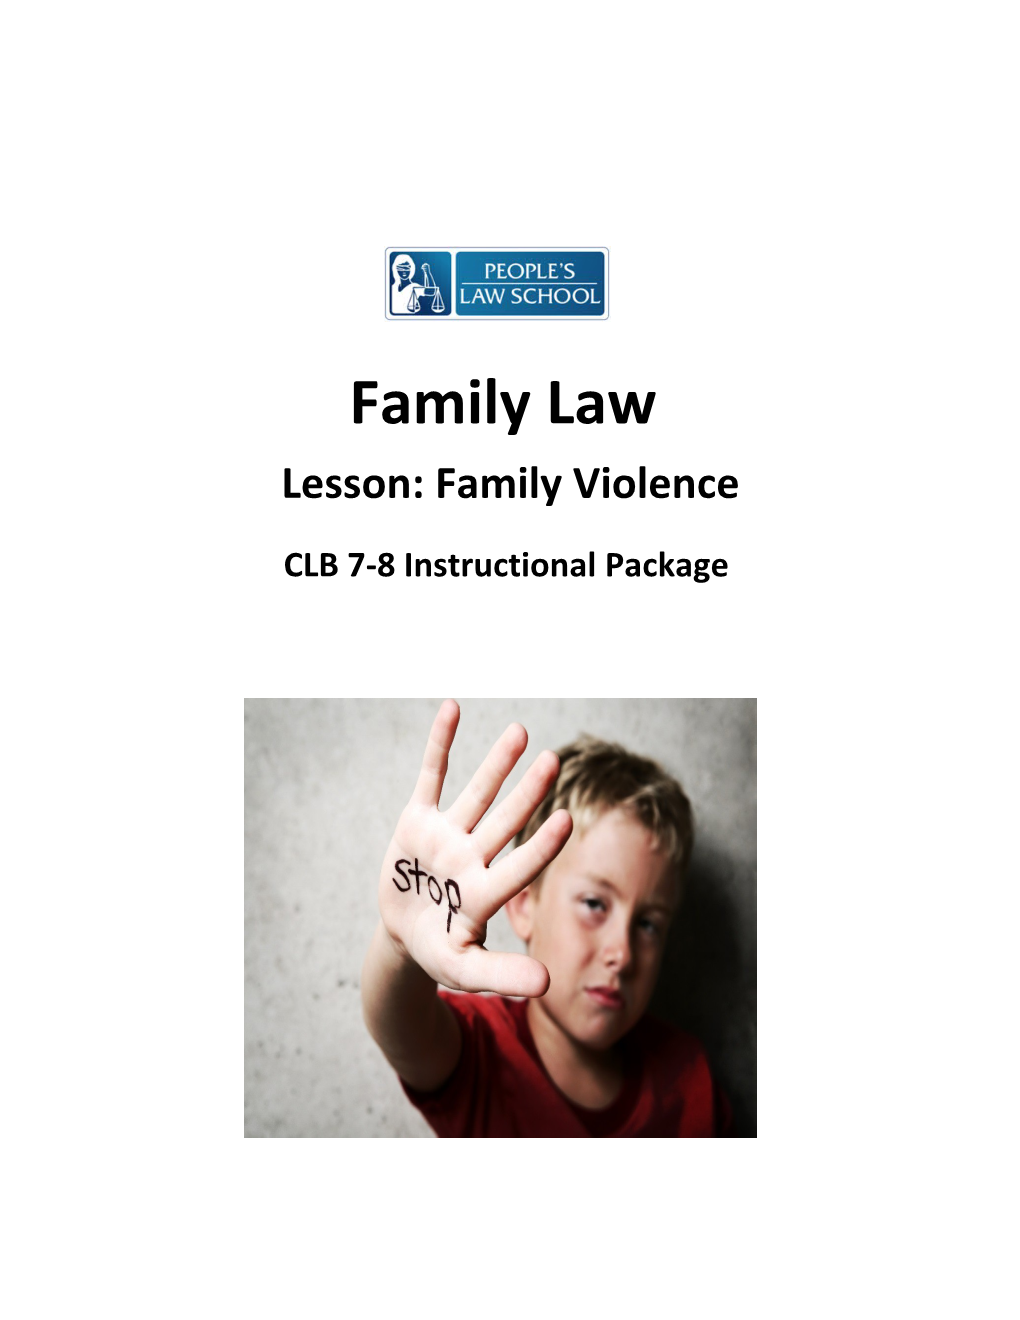 Lesson: Family Violence